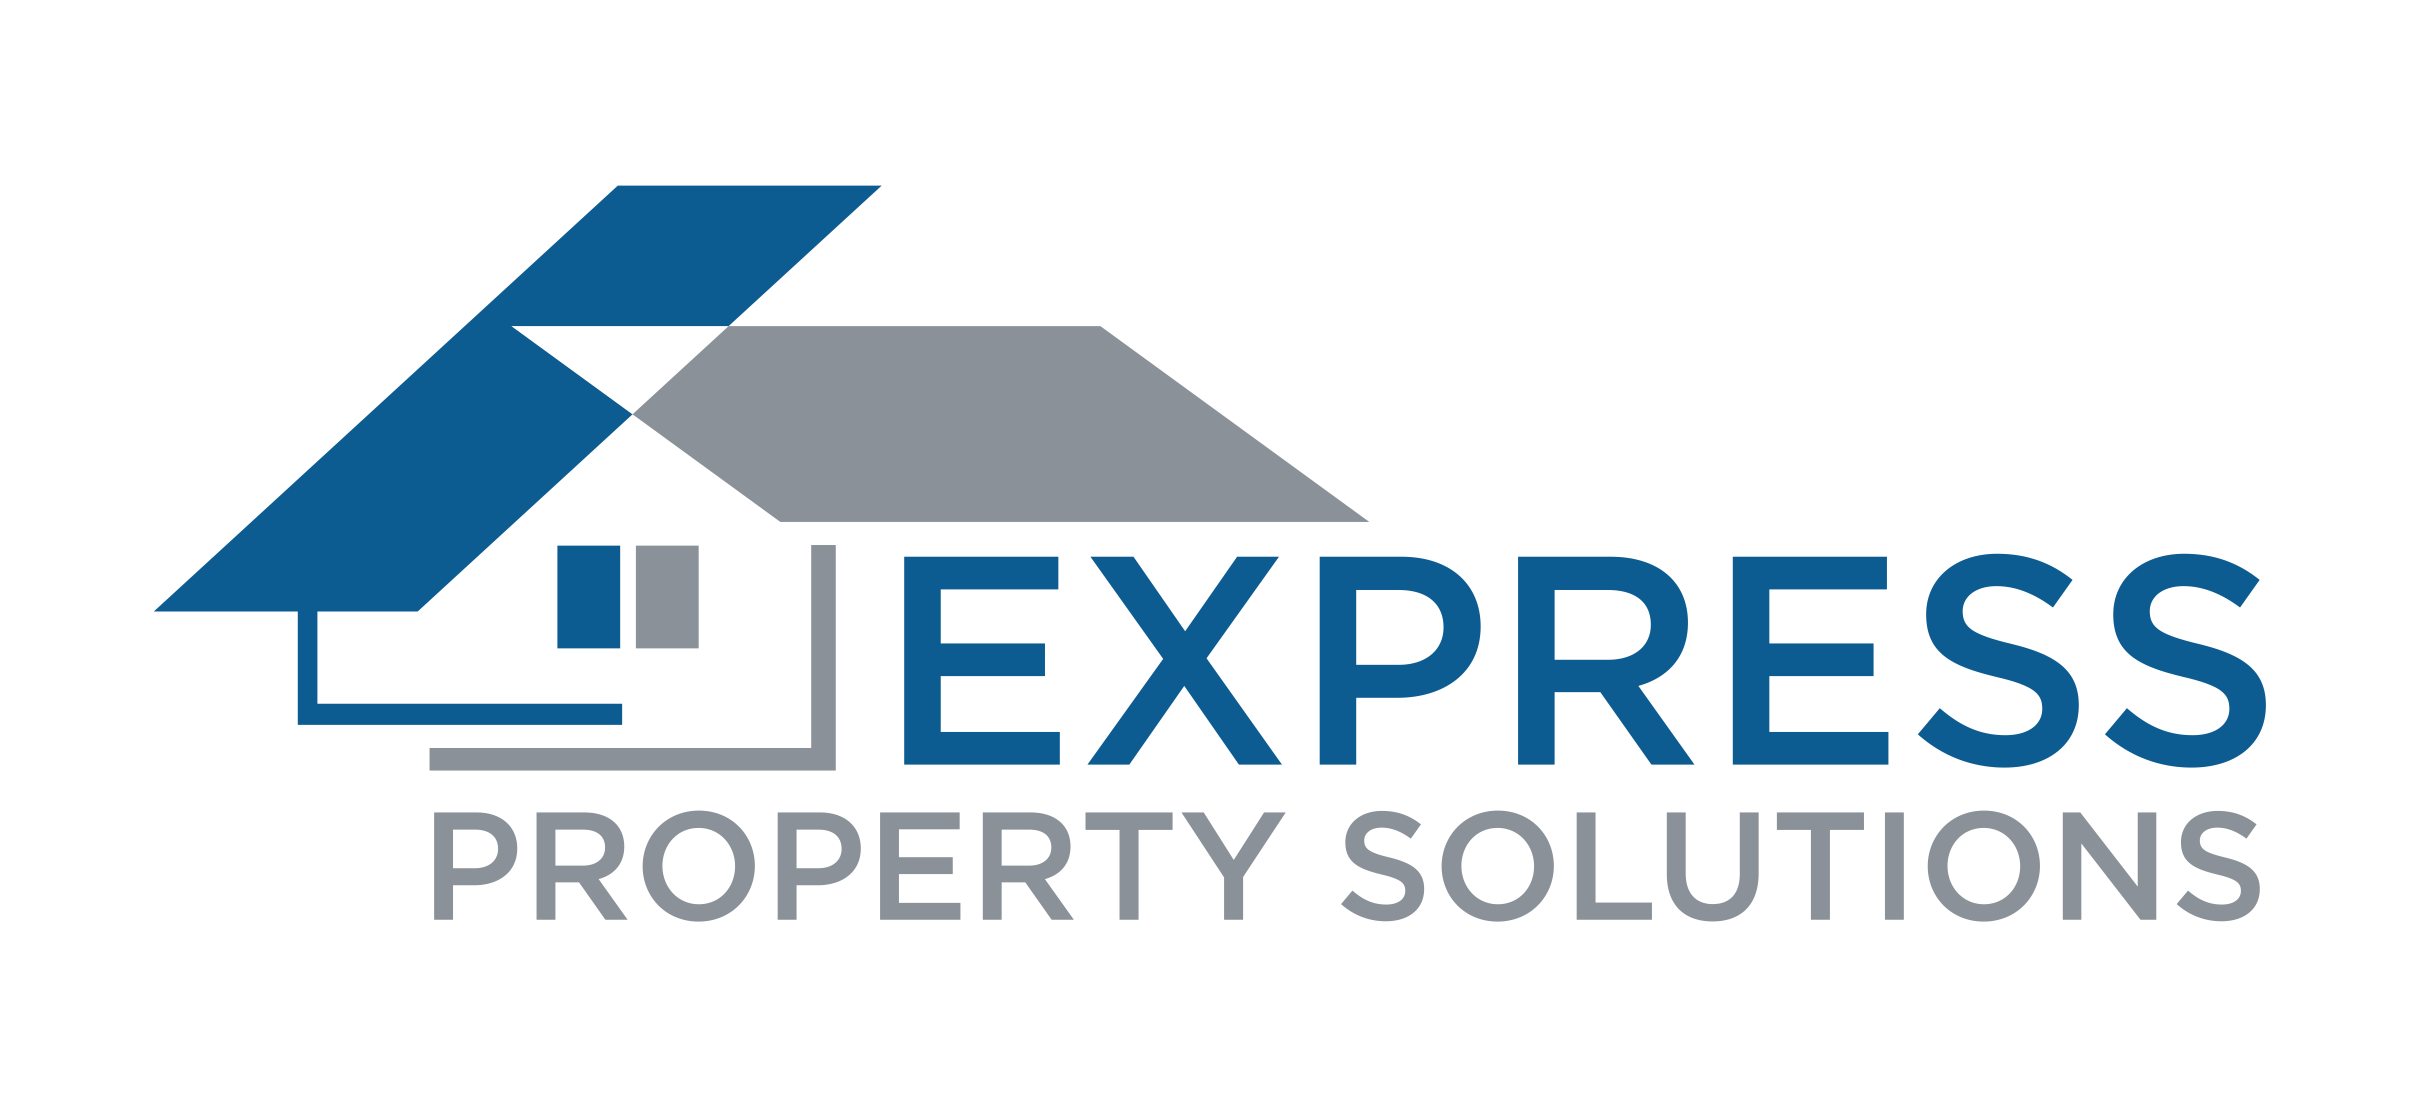 Express Property Solutions logo